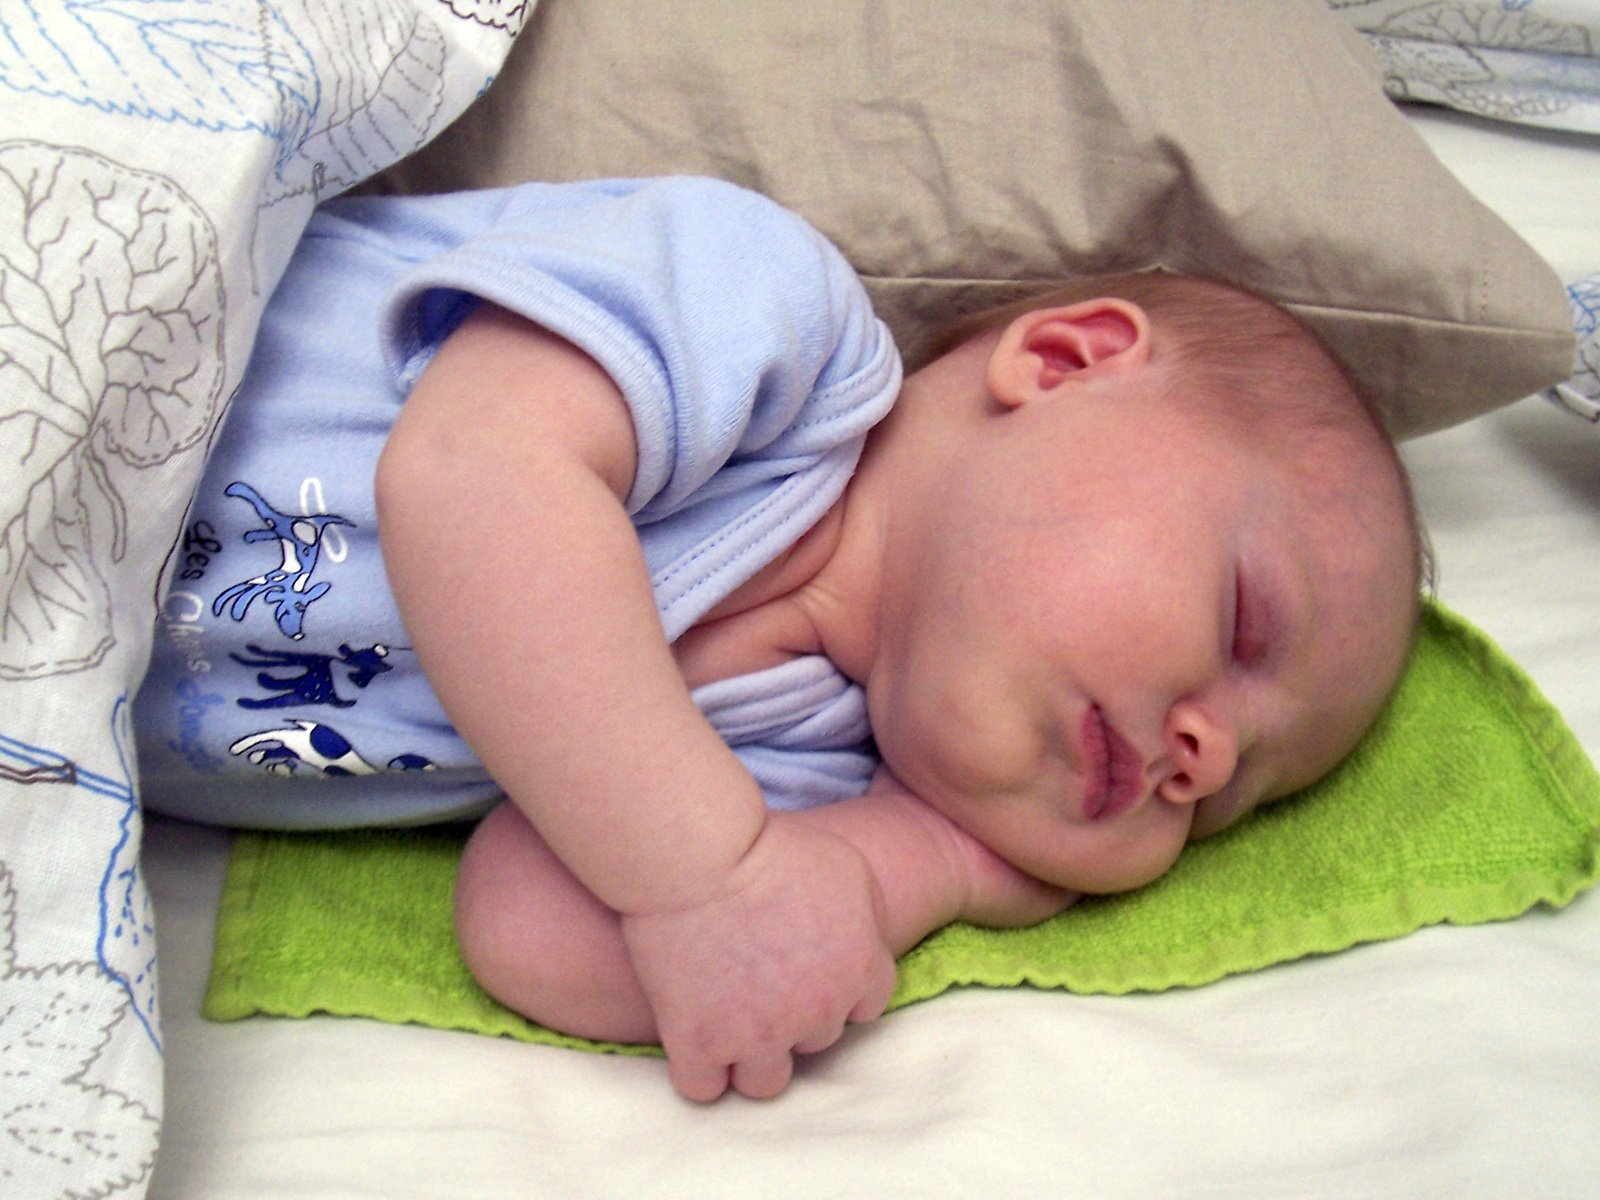 baby asleep on a blanket with pillows in the bed